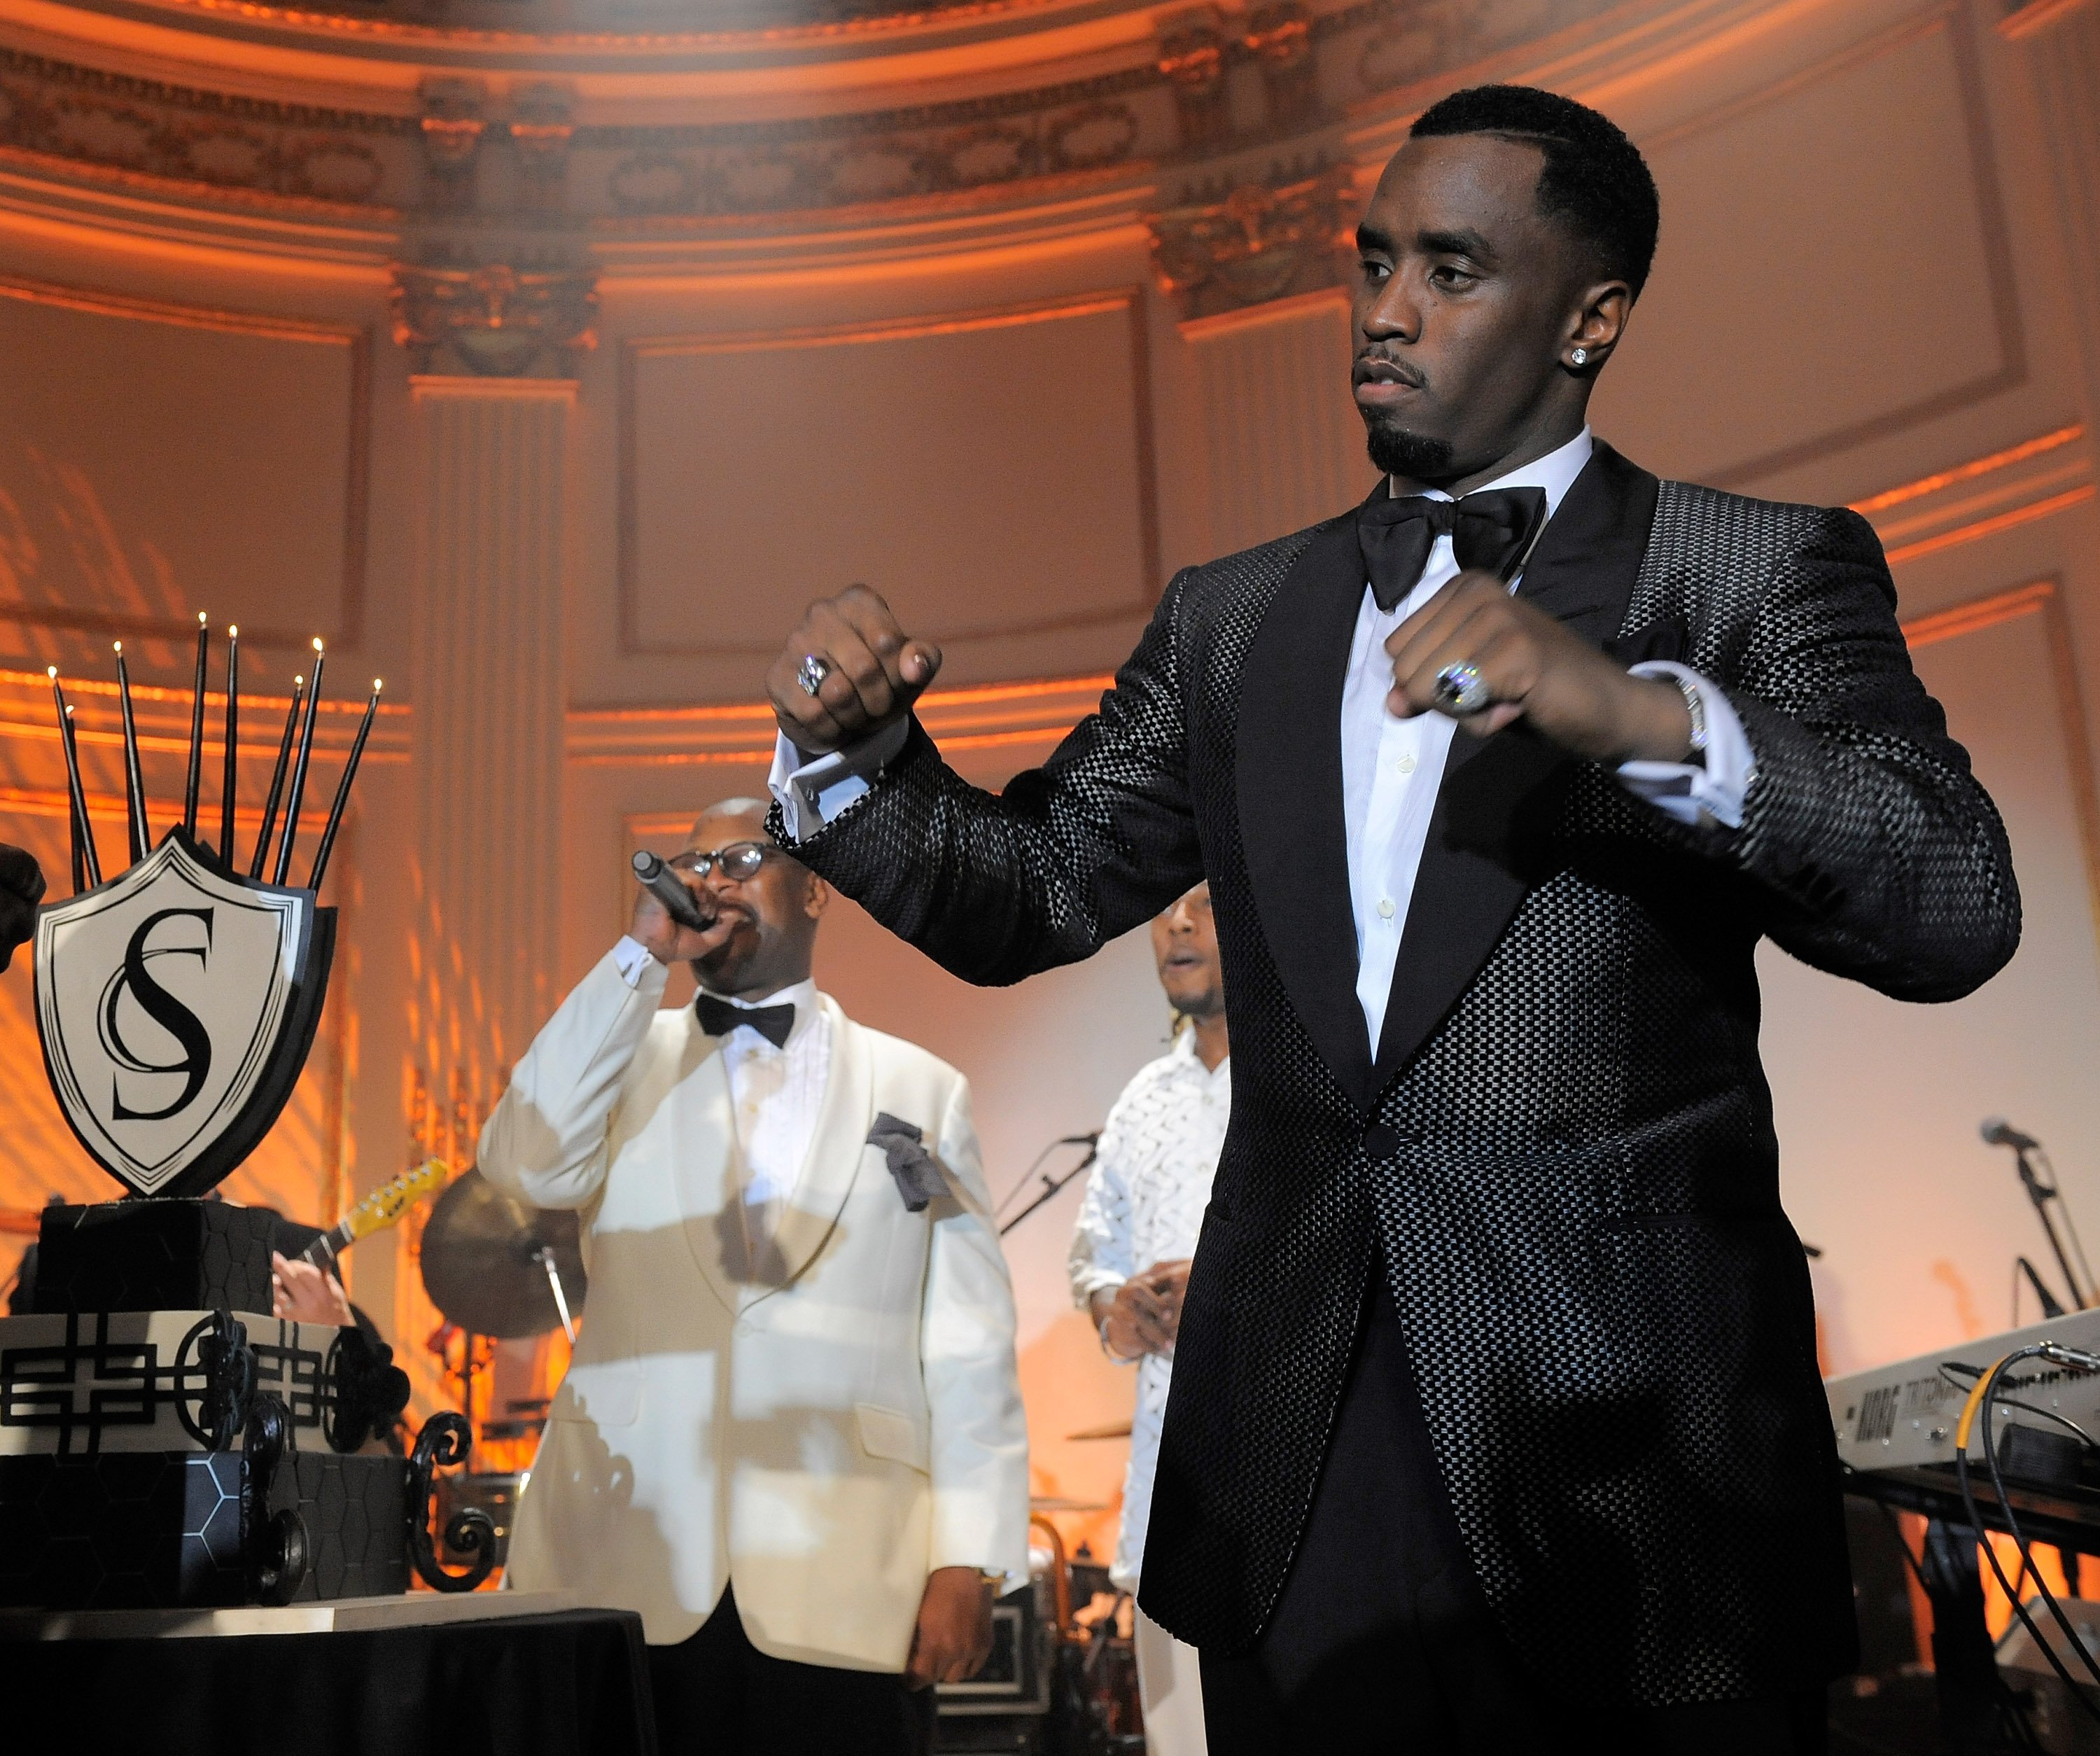 Diddy enjoying the moment at his celebration celebration held at The Plaza Hotel in New York, November 20, 2009. | Photo: Getty Images.